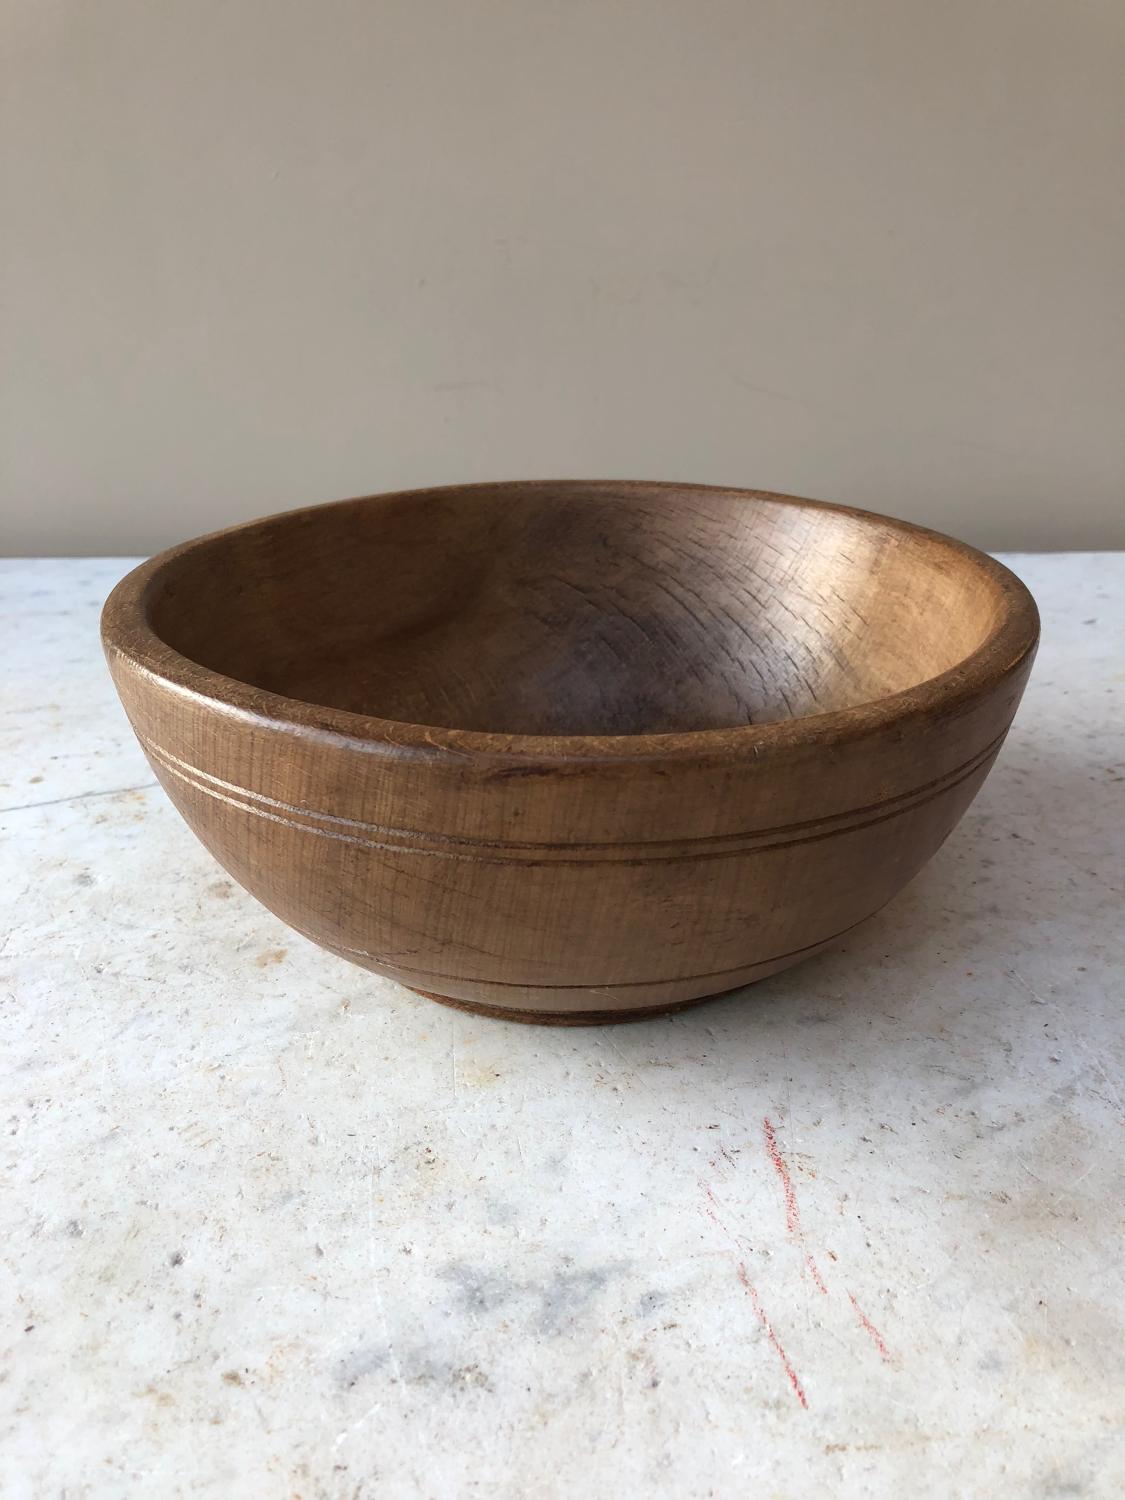 Small Victorian Treen Dairy Bowl in Wonderful Condition.